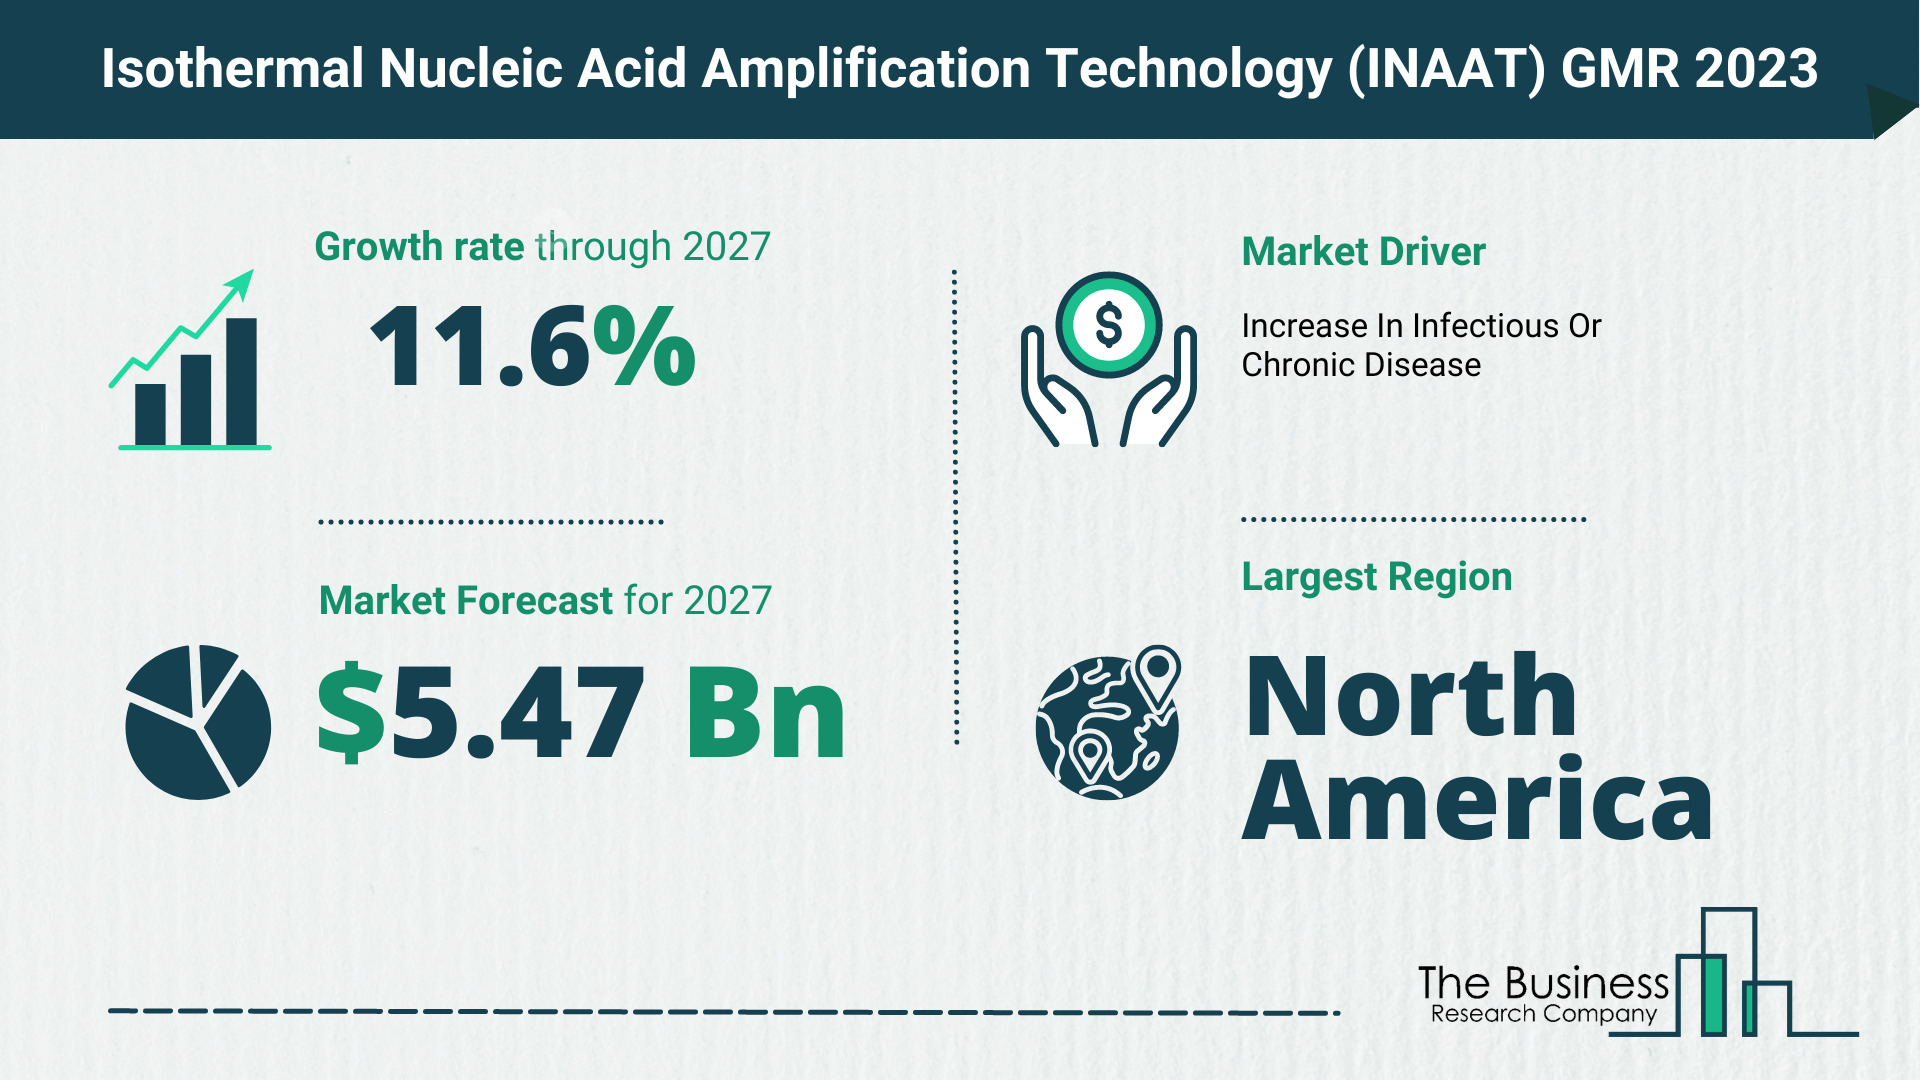 Global Isothermal Nucleic Acid Amplification Technology (INAAT) Market Opportunities And Strategies 2023